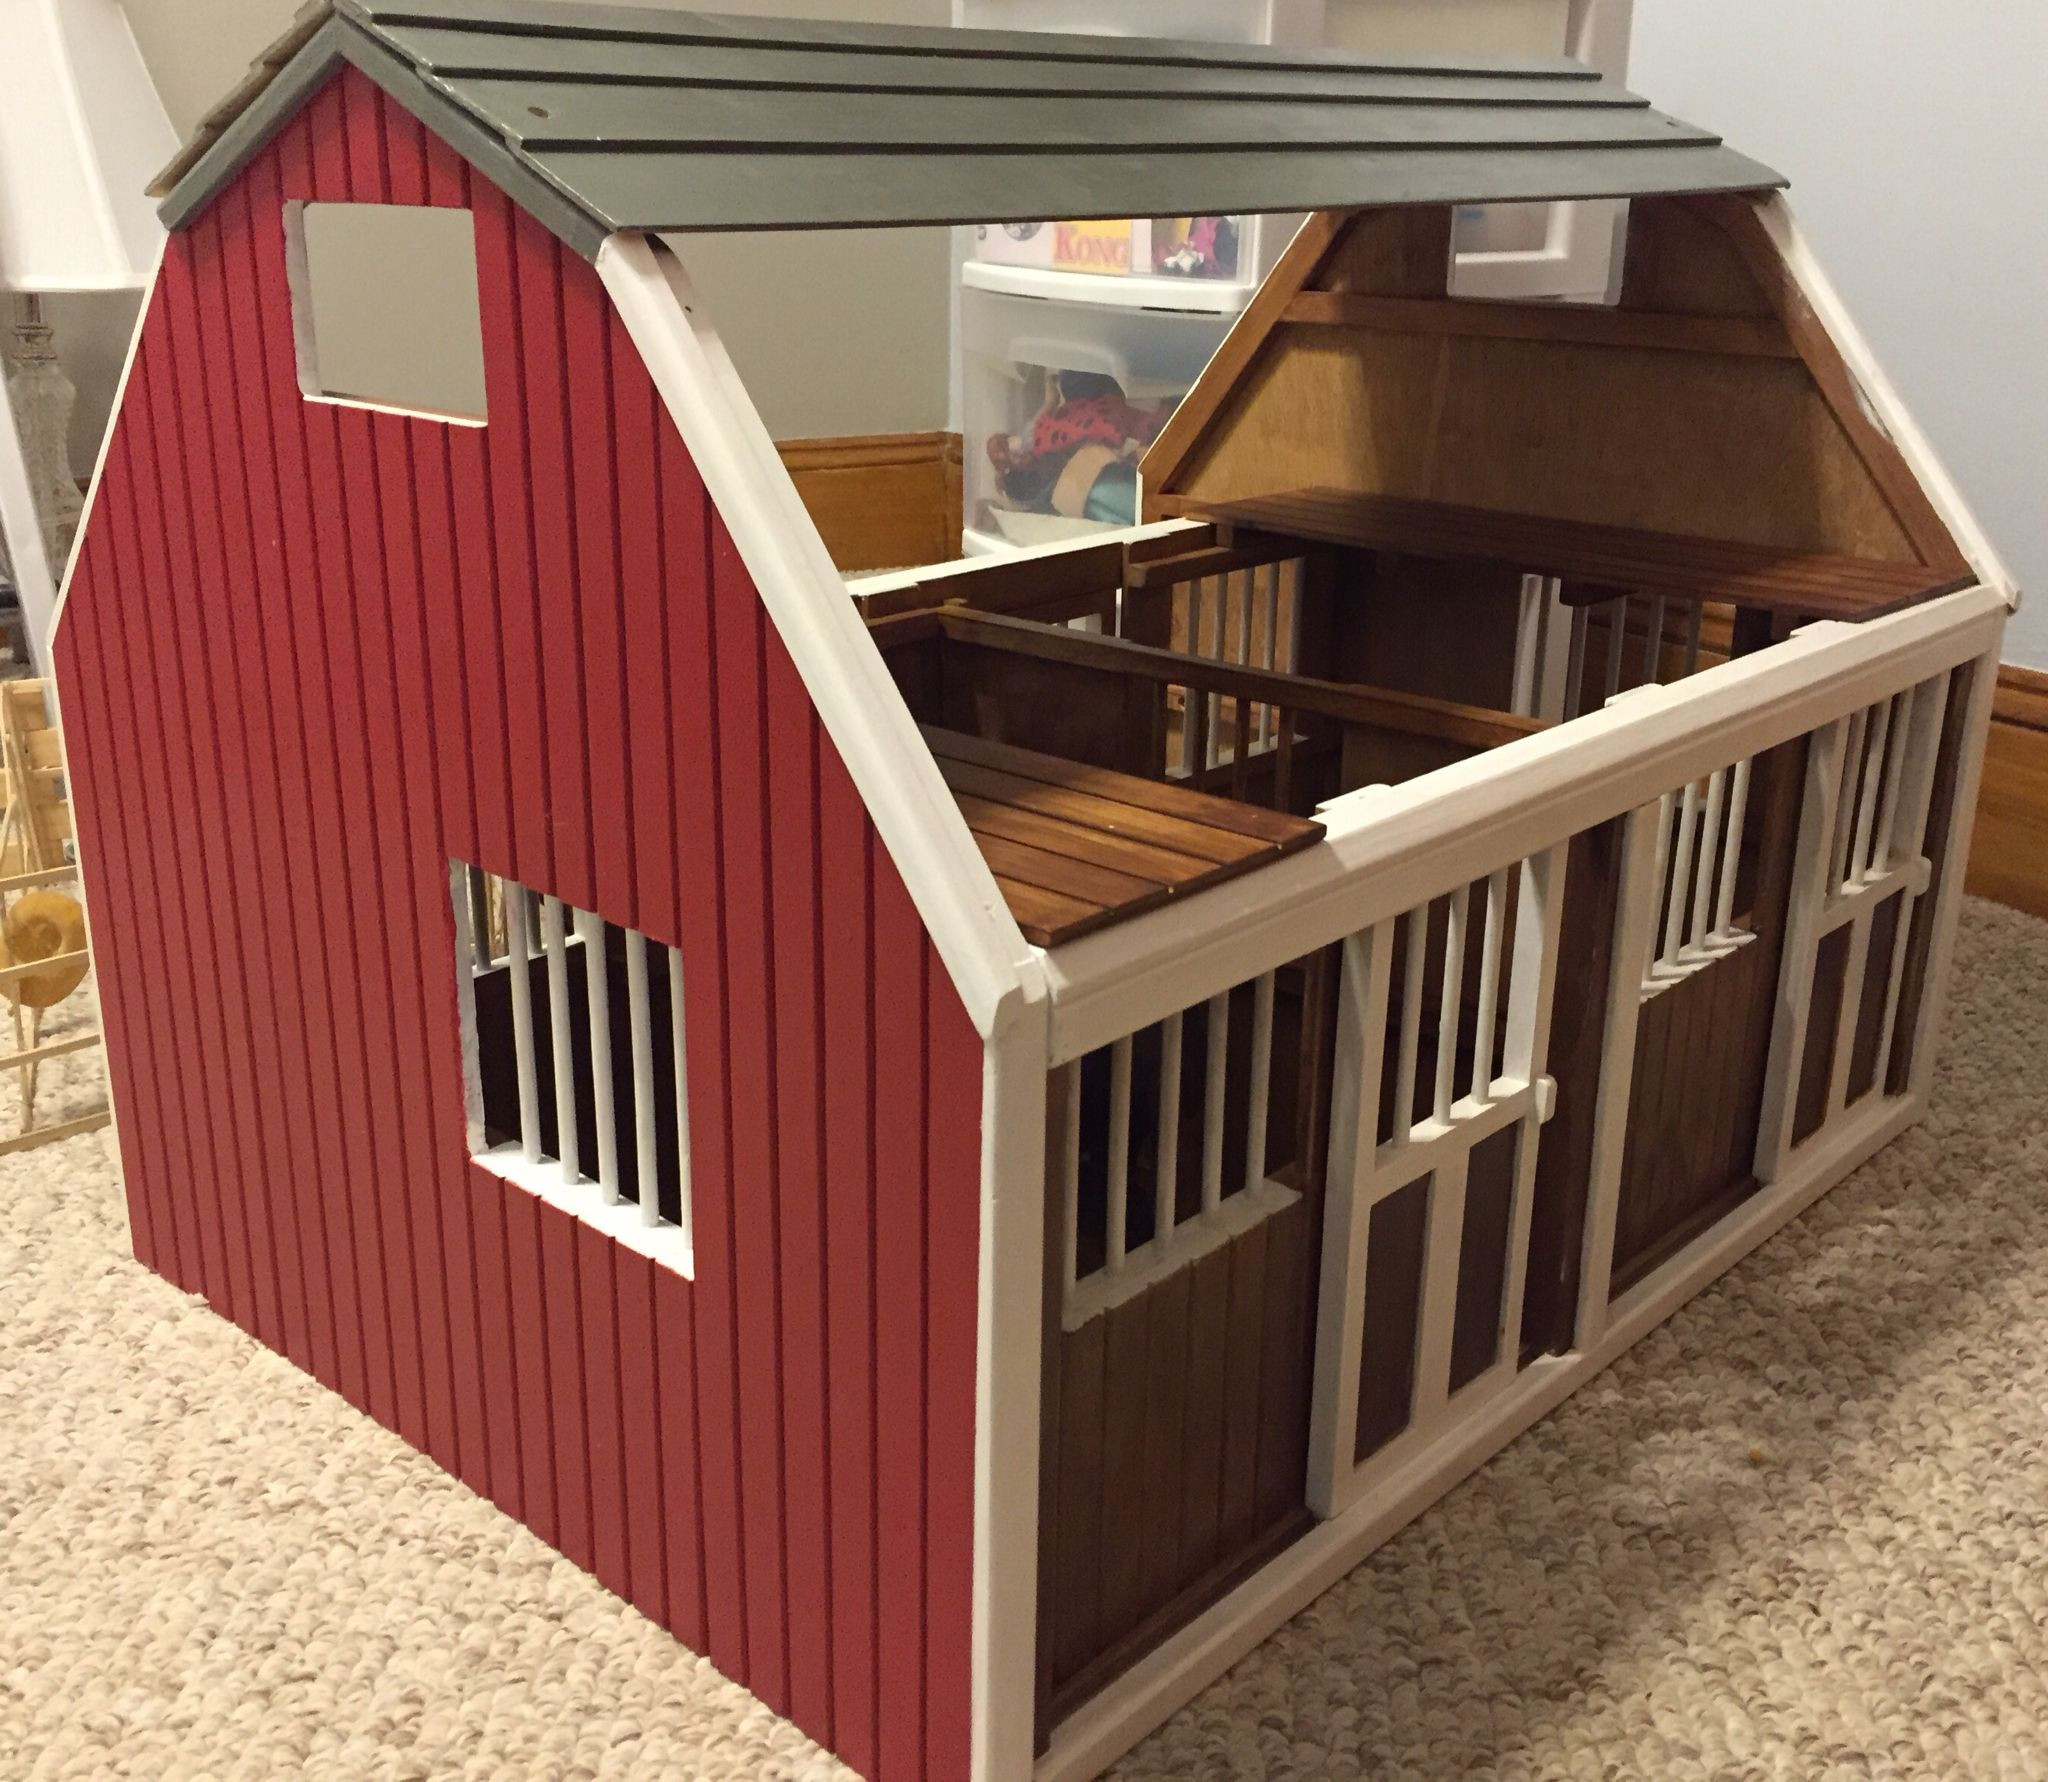 DIY Toy Barn Plans
 Breyer Horse Barn painted by me for her collection The